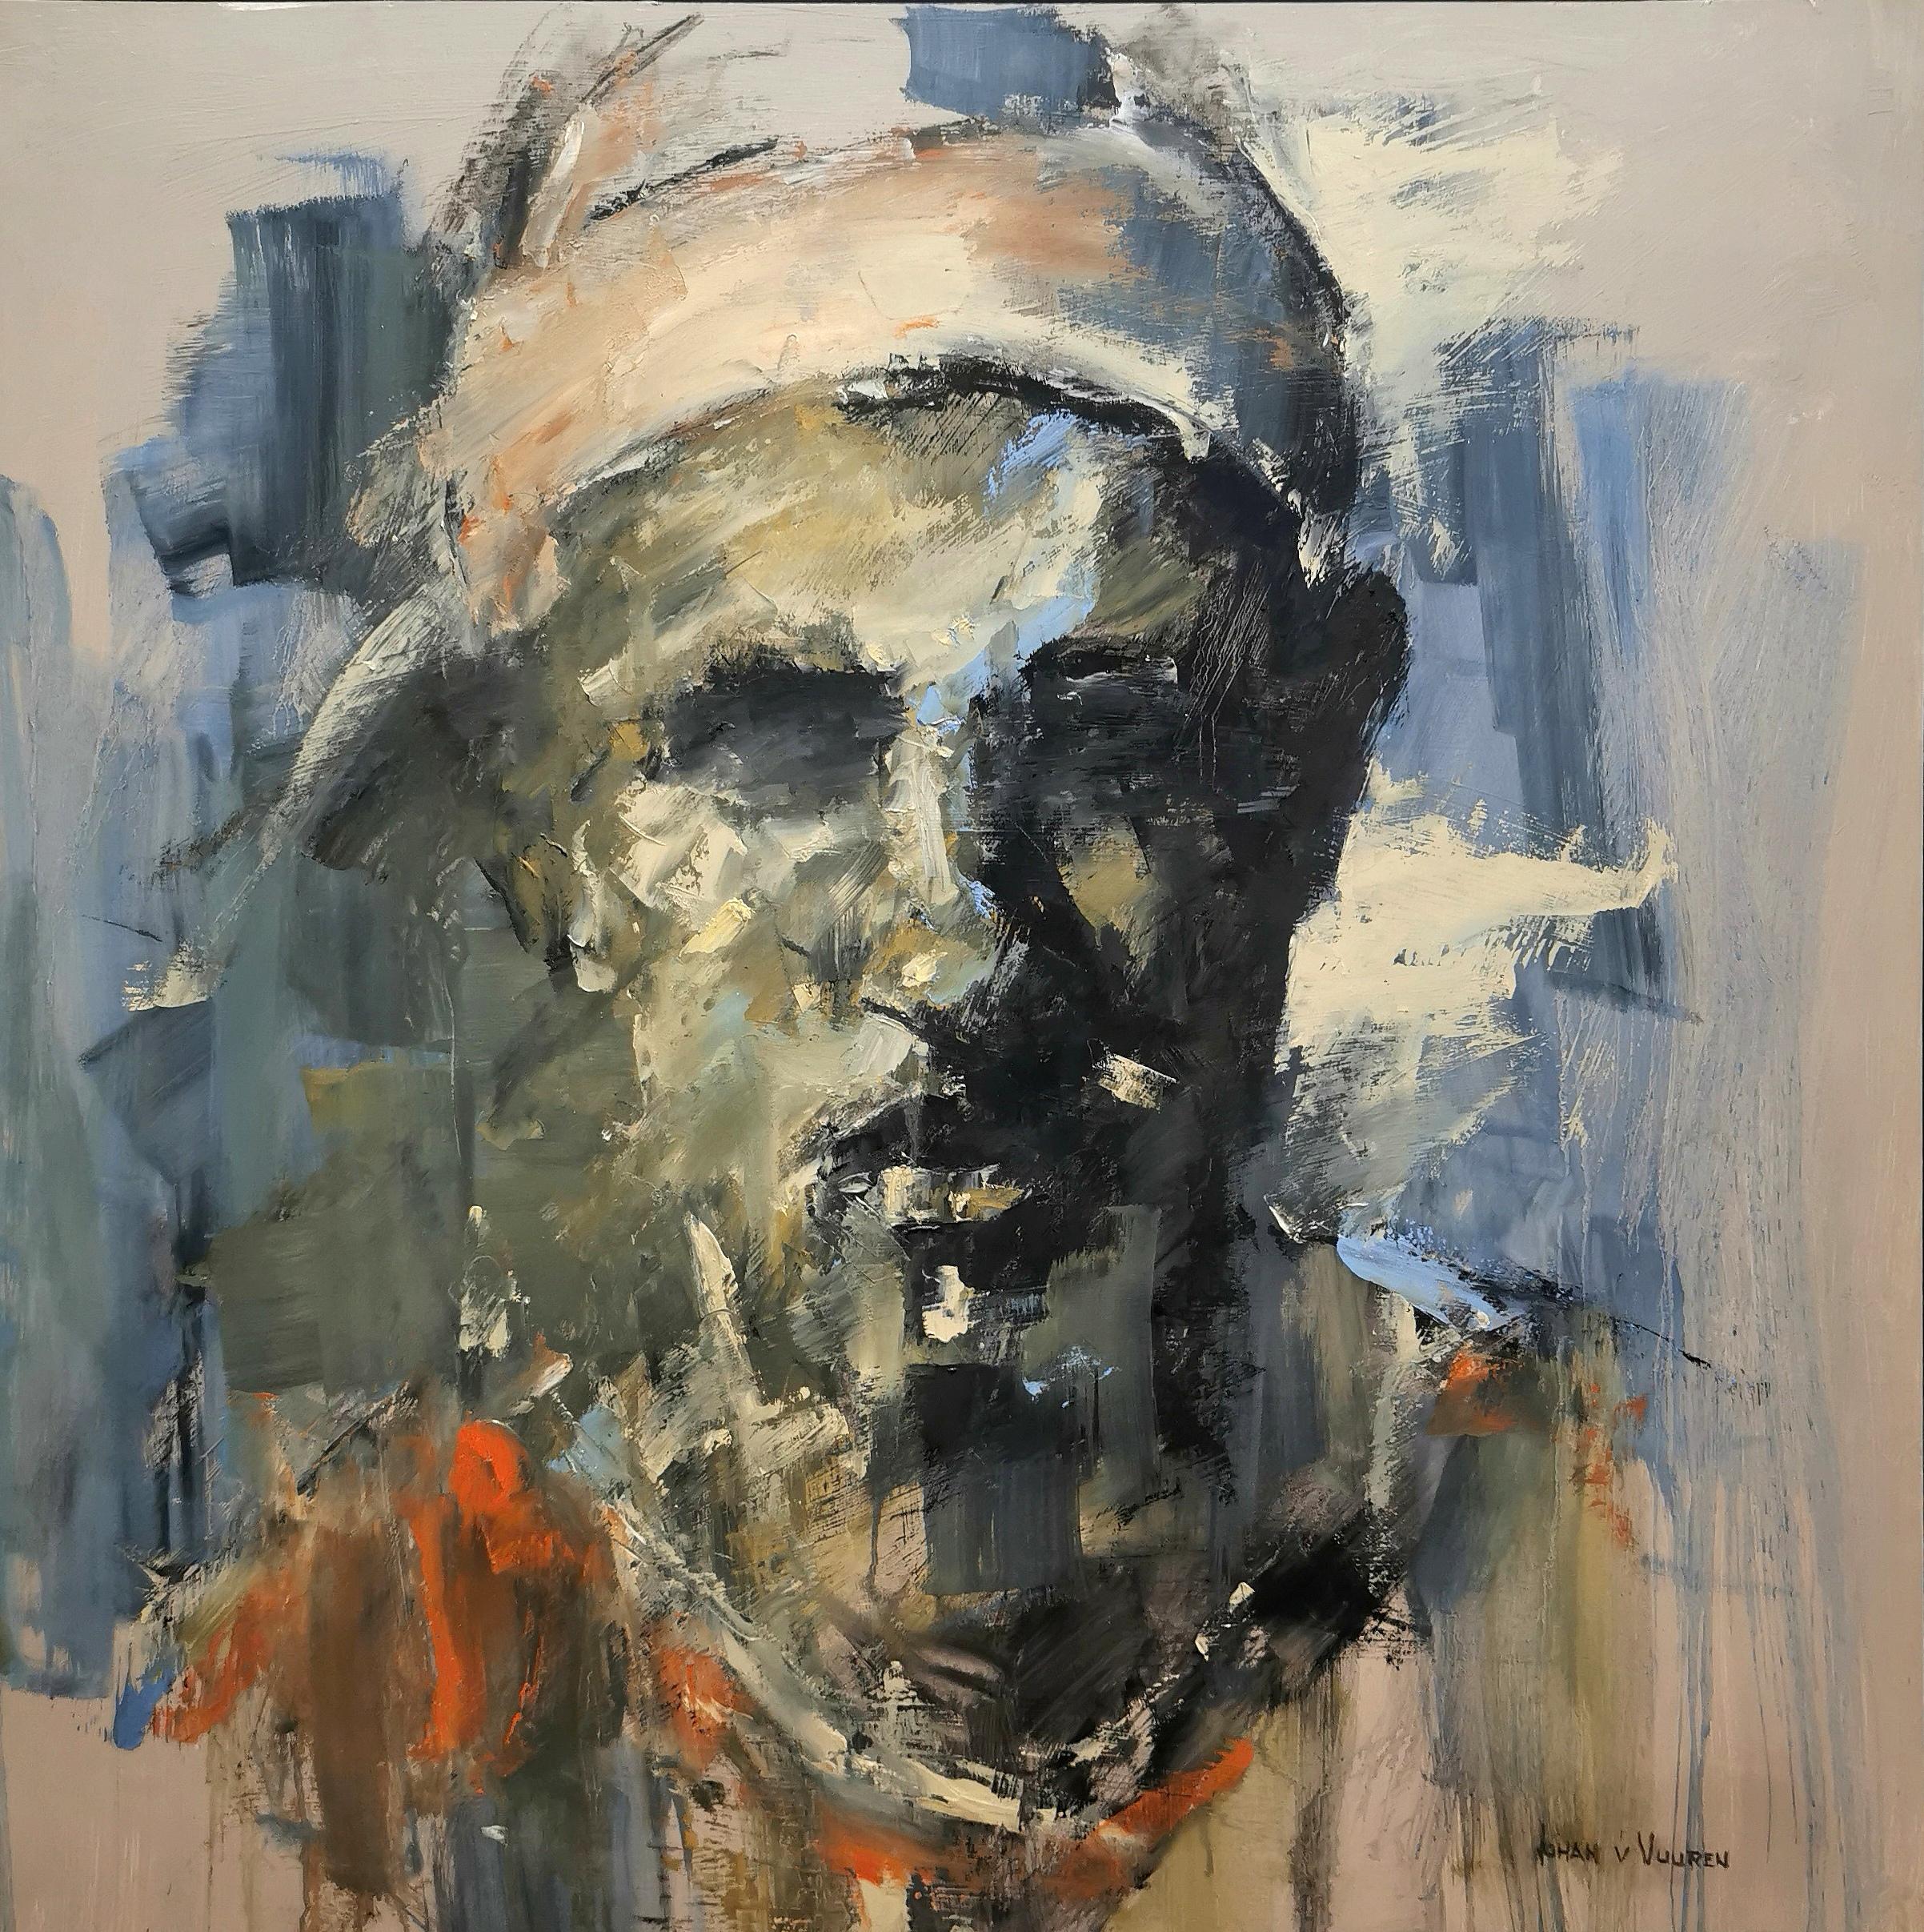 Johan van Vuuren Abstract Painting - Oil on Board Abstract Expressive Portrait "Man with Hat"